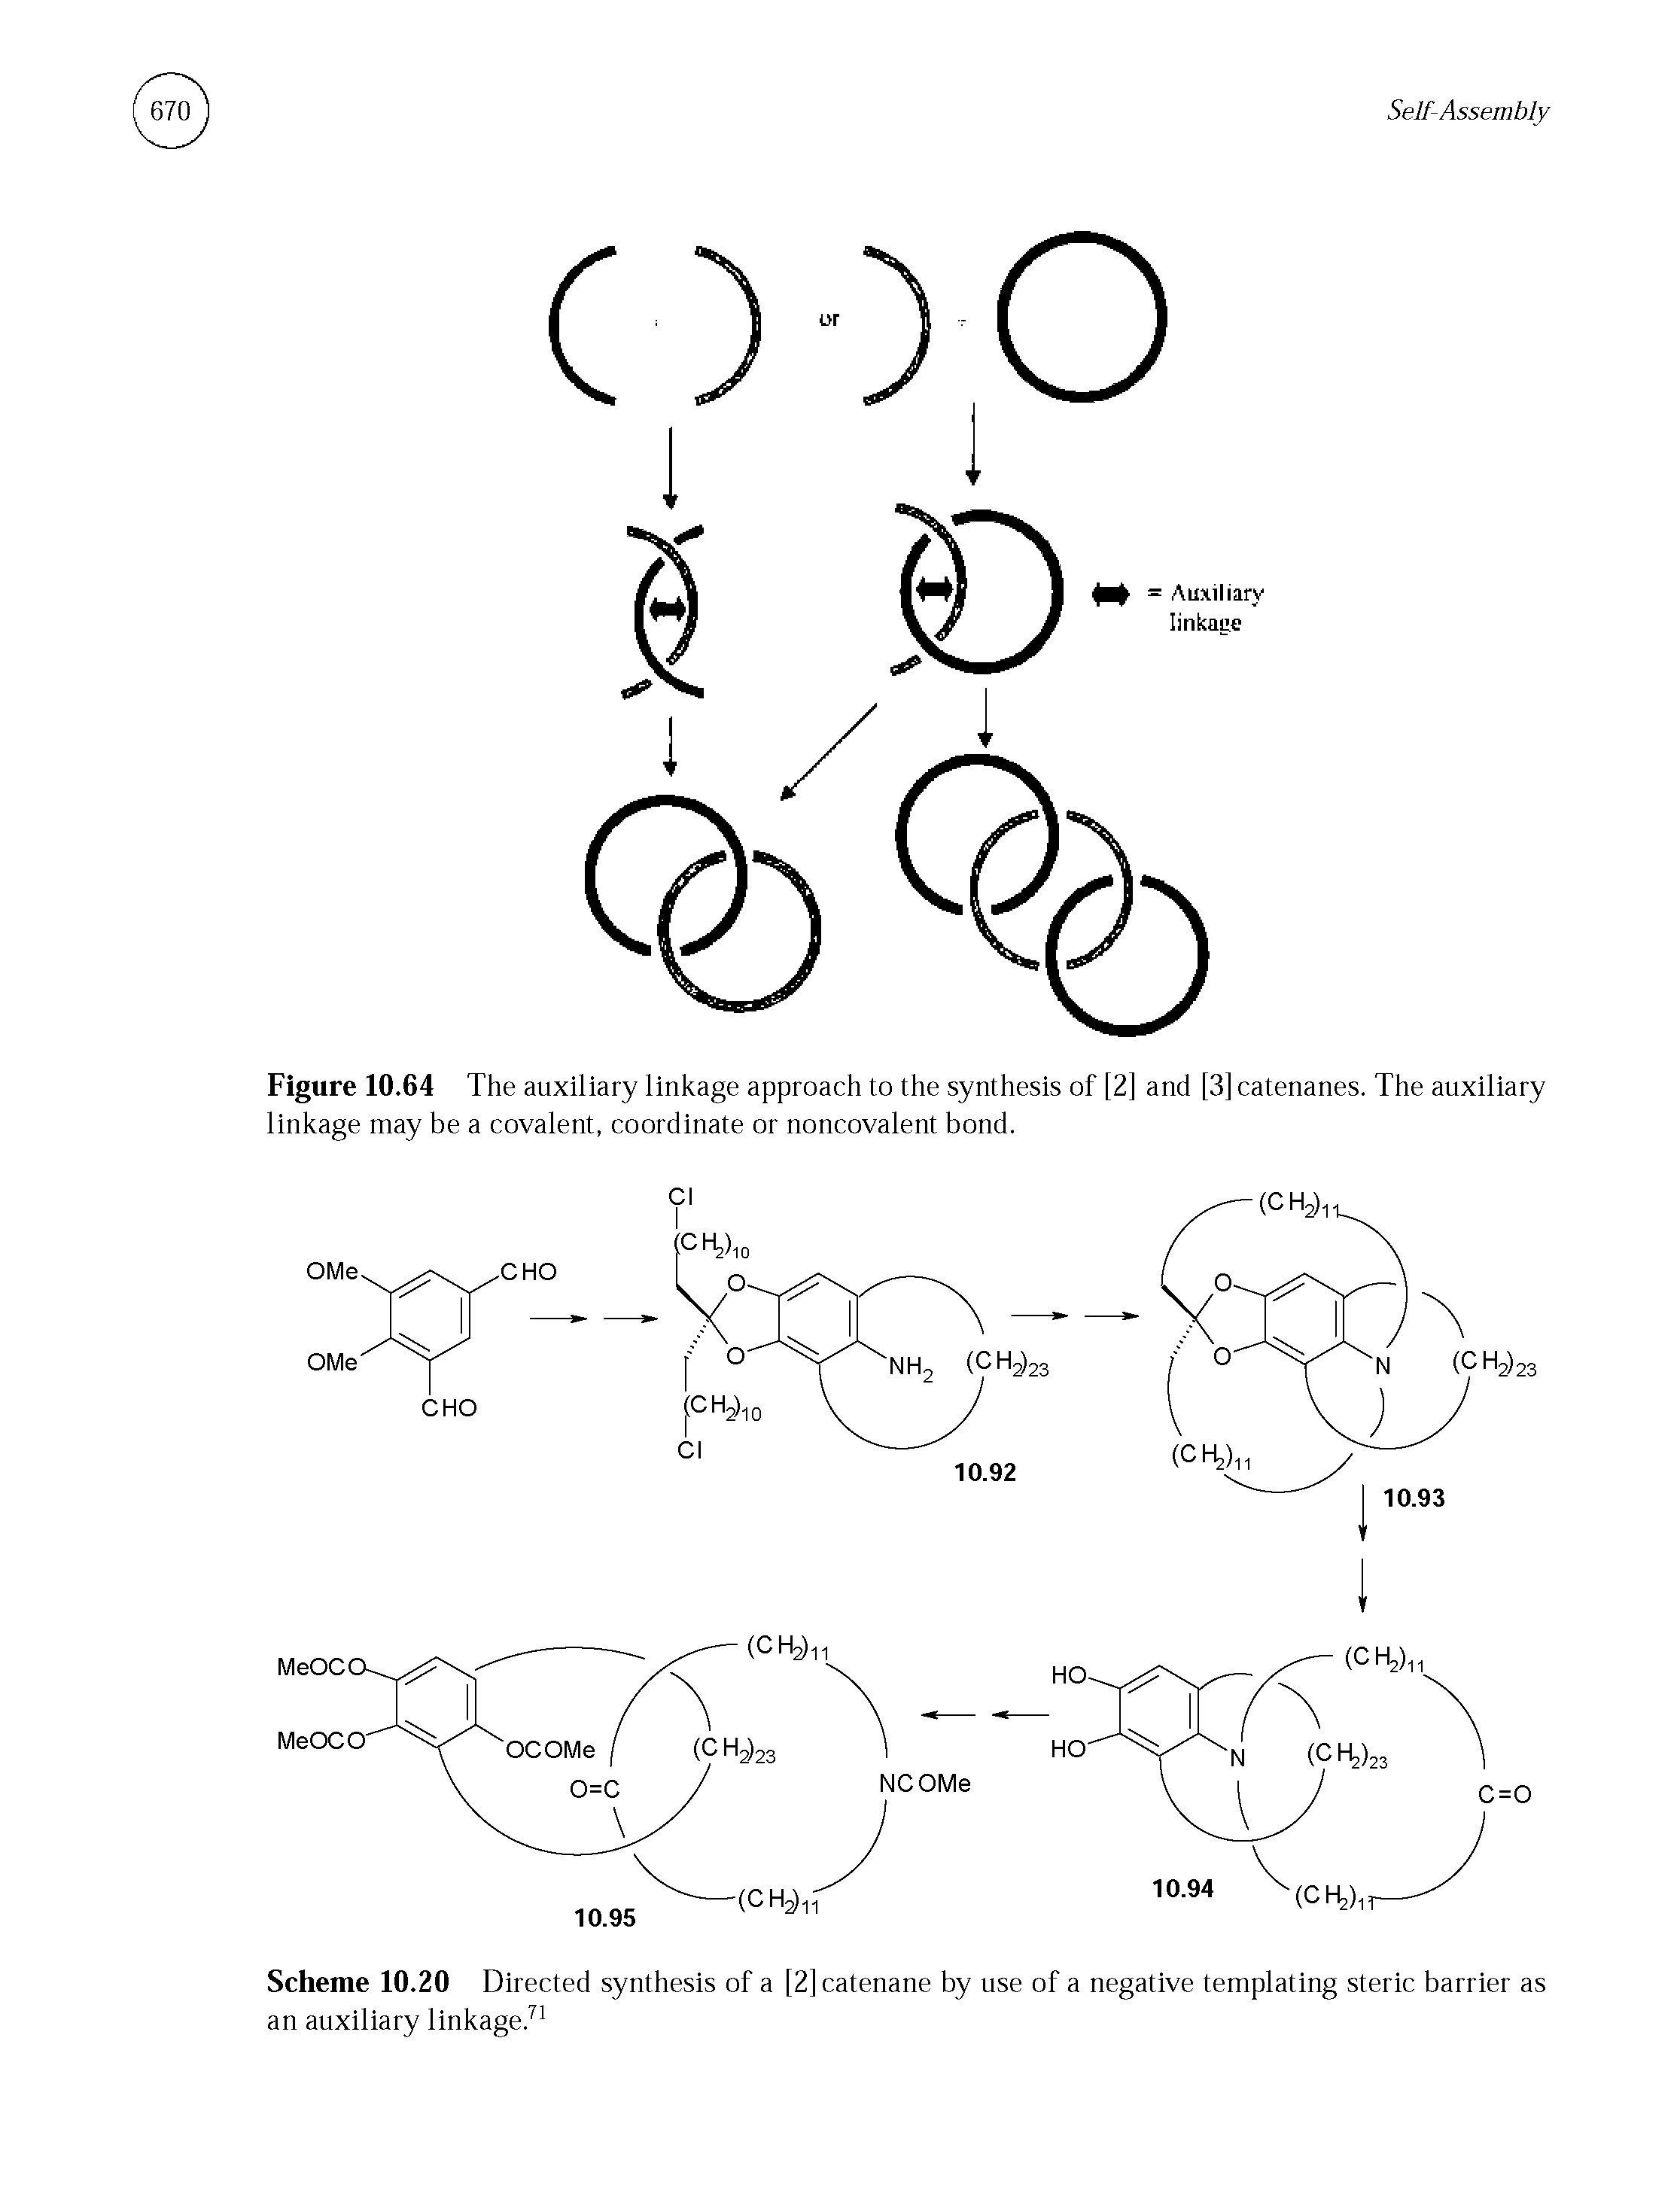 Figure 10.64 The auxiliary linkage approach to the synthesis of [2] and [3] catenanes. The auxiliary linkage may be a covalent, coordinate or noncovalent bond.